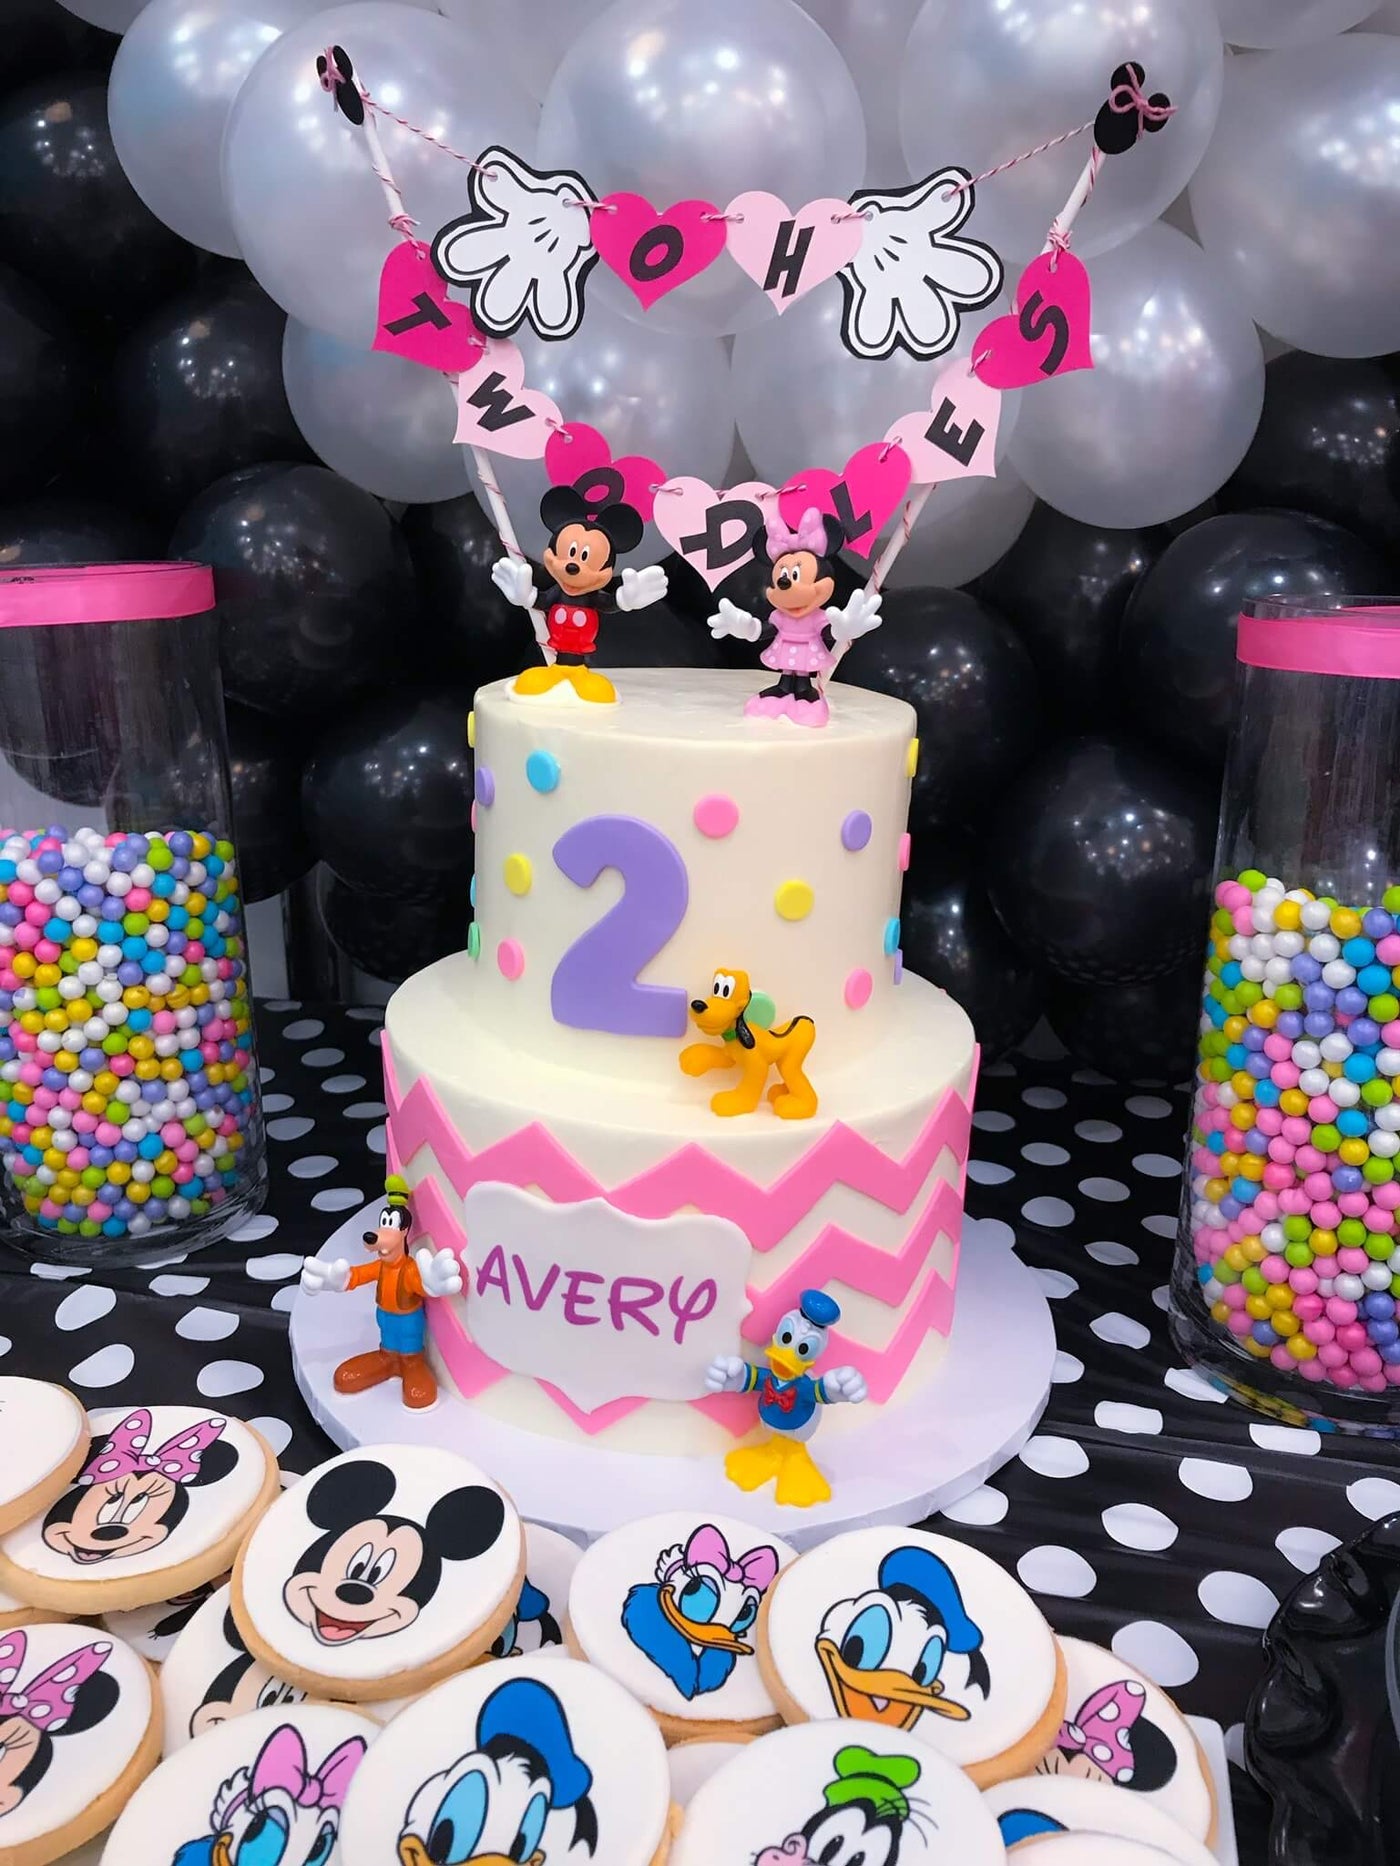 Mickey Mouse Clubhouse Cake - Sweet E's Bake Shop